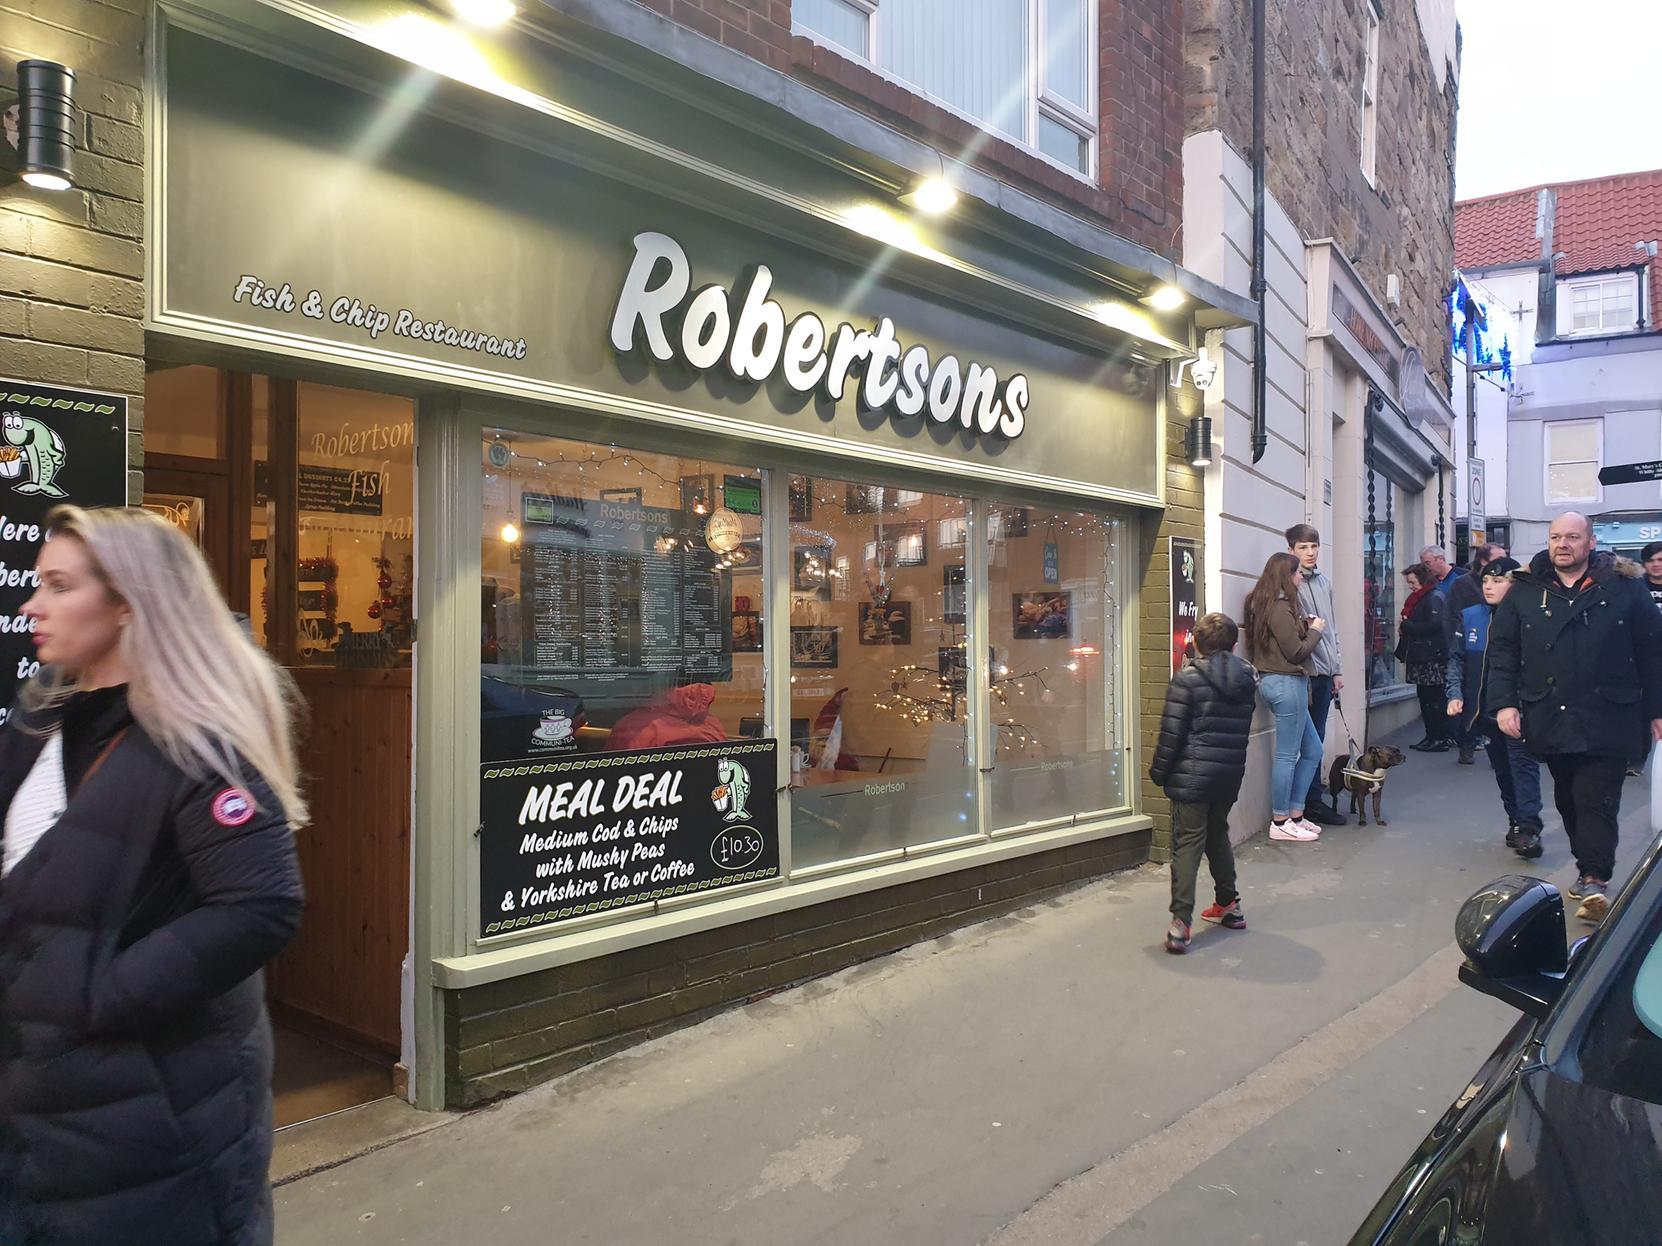 Robertsons
A reviewer said:
Great fish & chips to takeaway. Cooked fresh while you wait and packed up in a box. Friendly and quick service too. Conveniently located right by the bridge. Good menu, including good choice of chocolate options to deep-fry - but we stuck to more conventional scampi and Haddock!